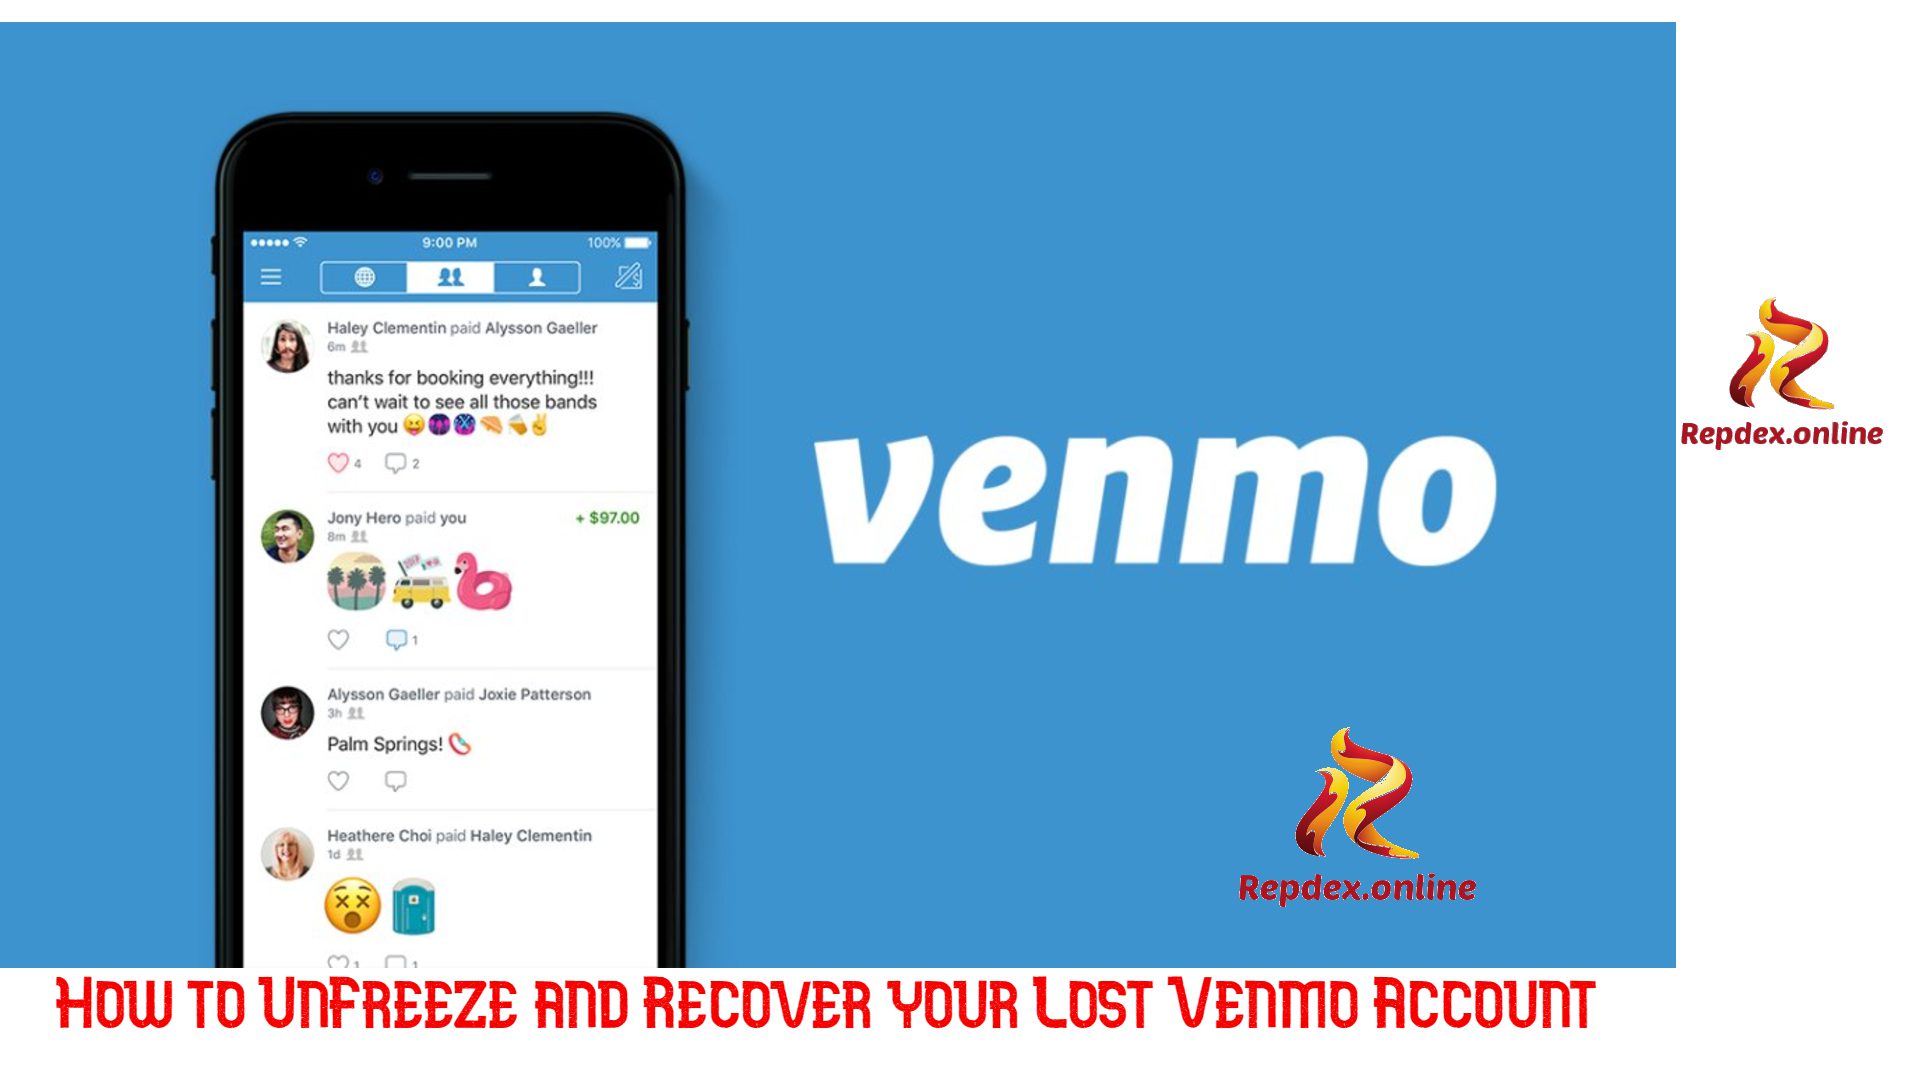 How to UnFreeze and Recover your Lost Venmo Account